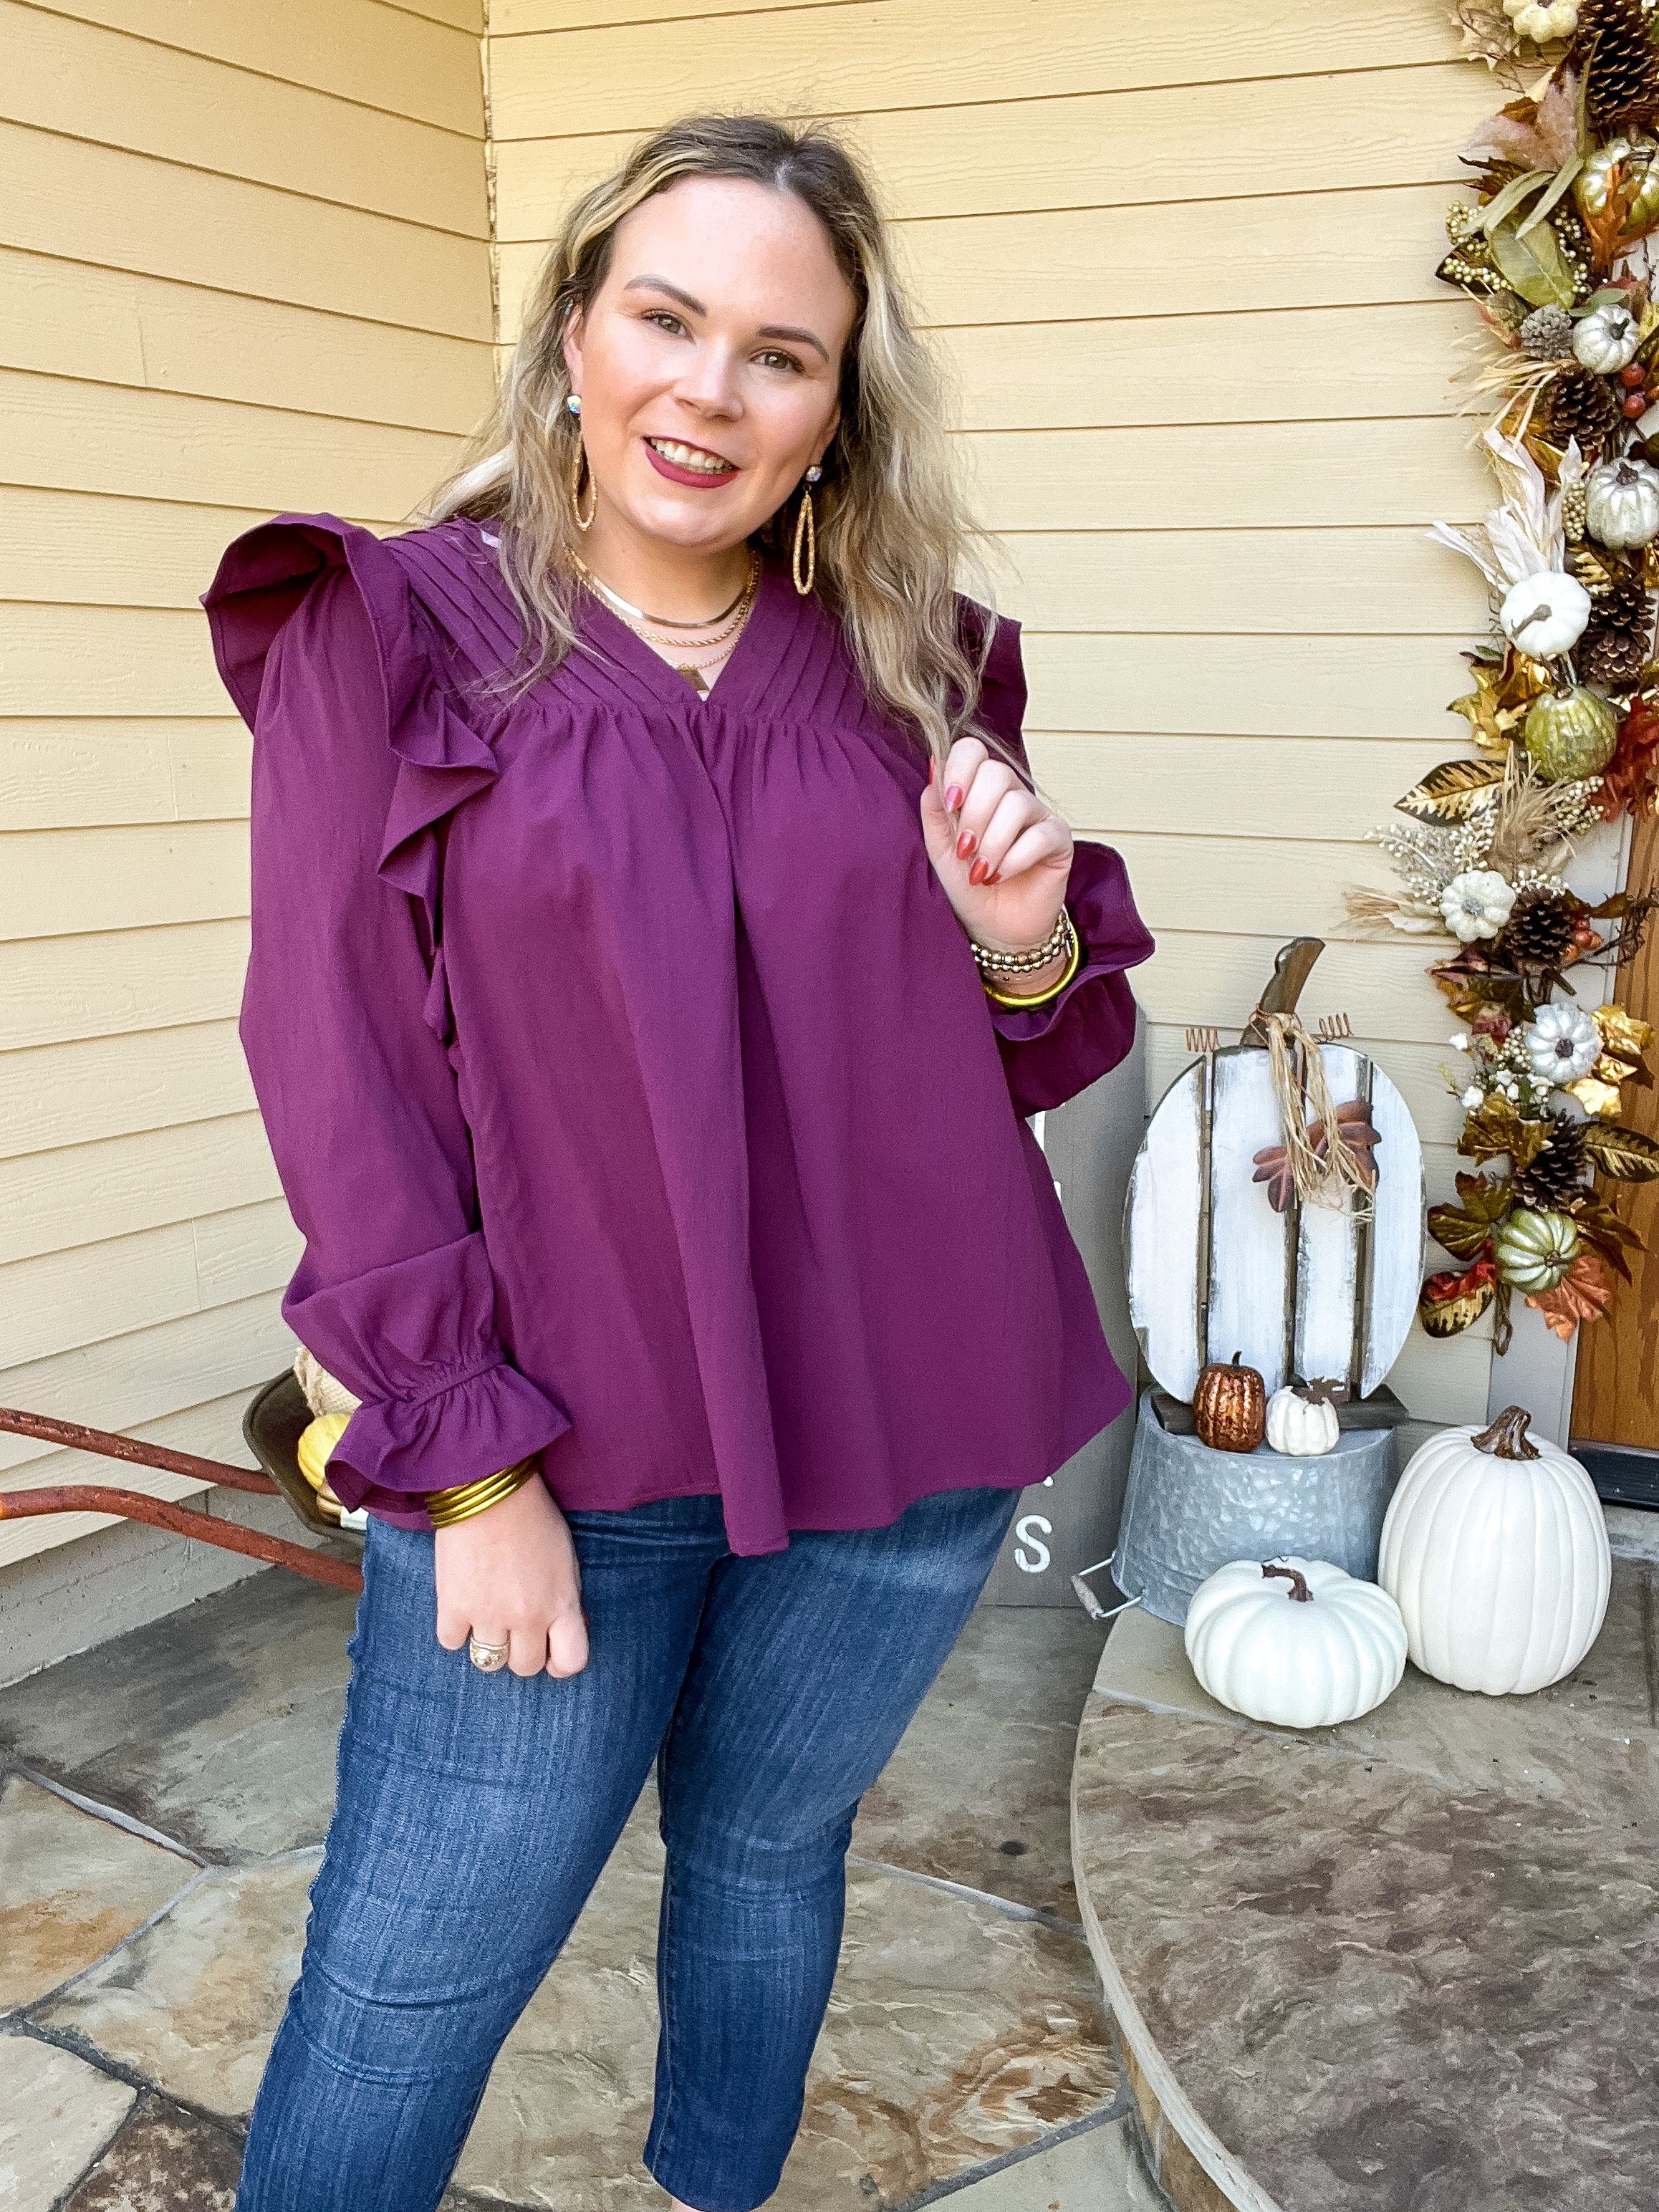 Coffee Perks Ruffle Detail Long Sleeve Top in Eggplant Purple - Giddy Up Glamour Boutique